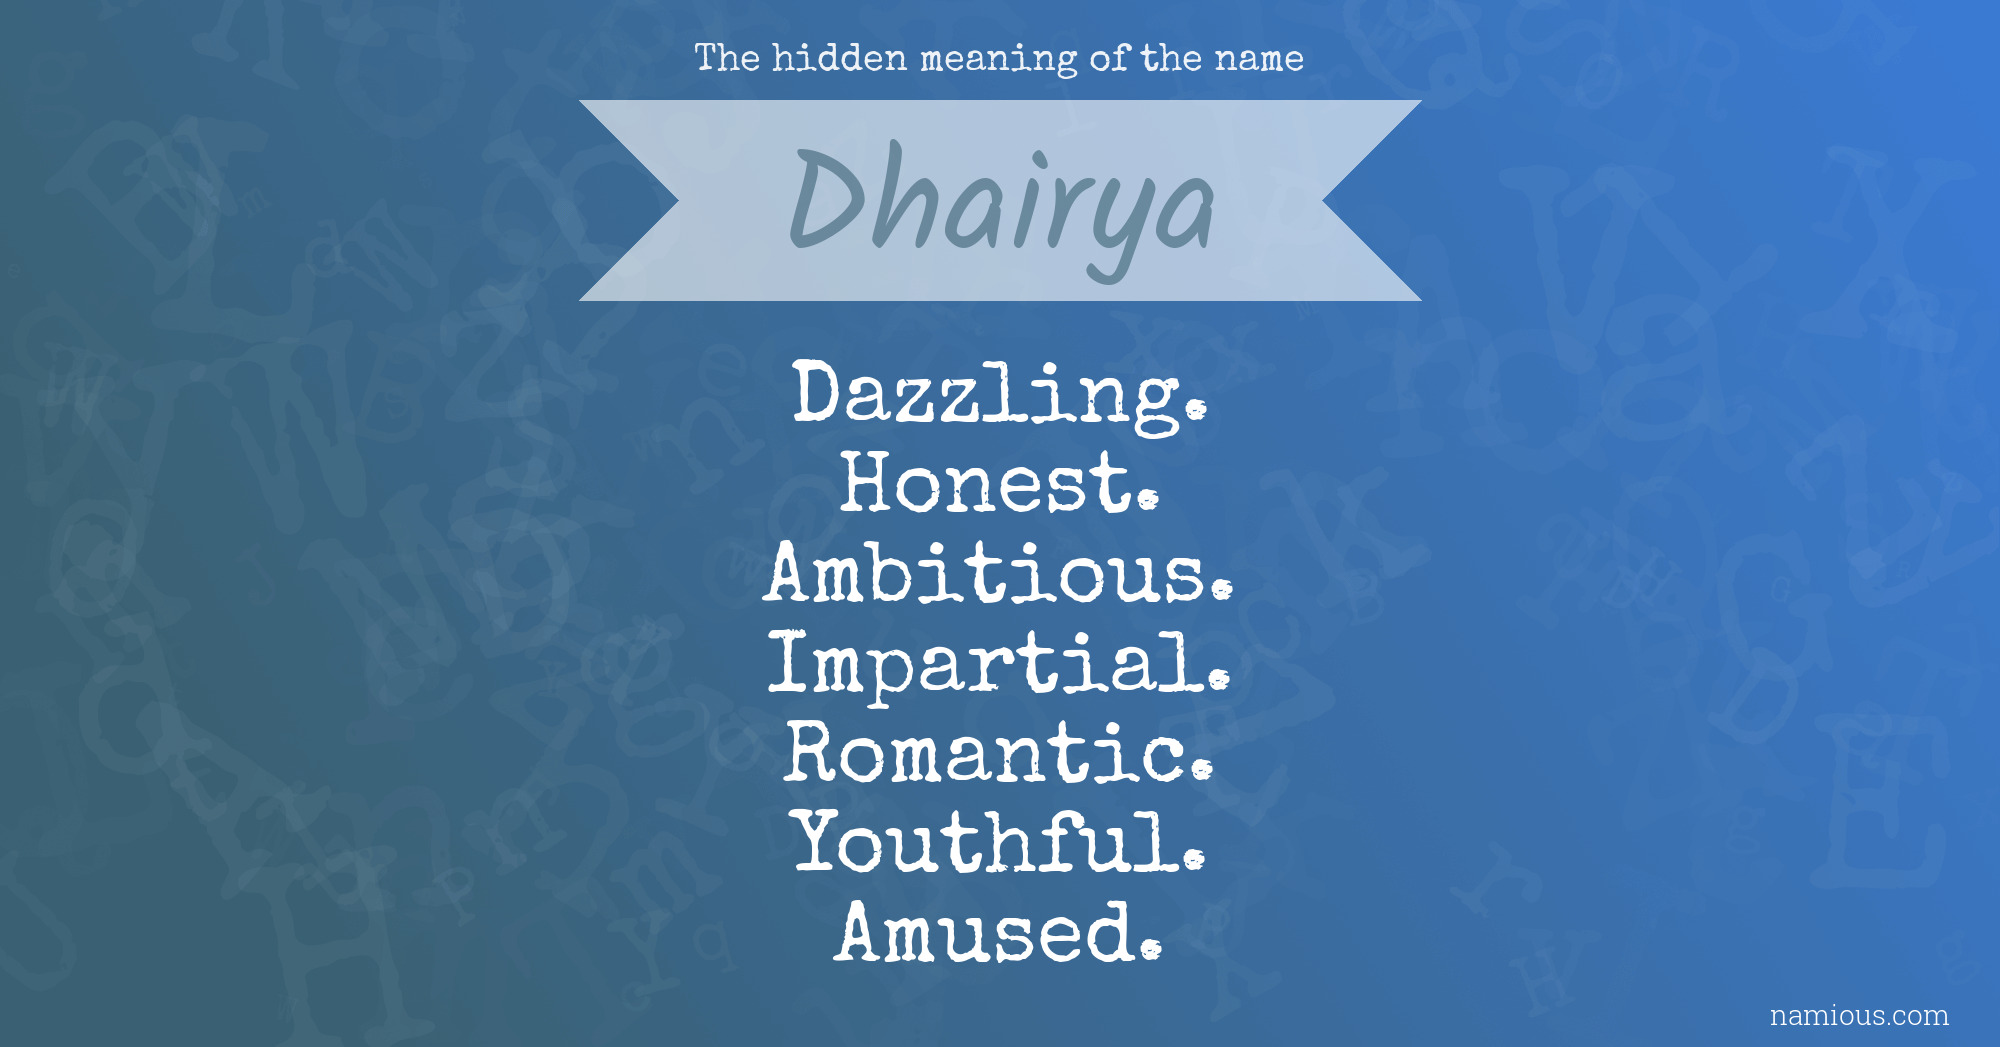 The hidden meaning of the name Dhairya